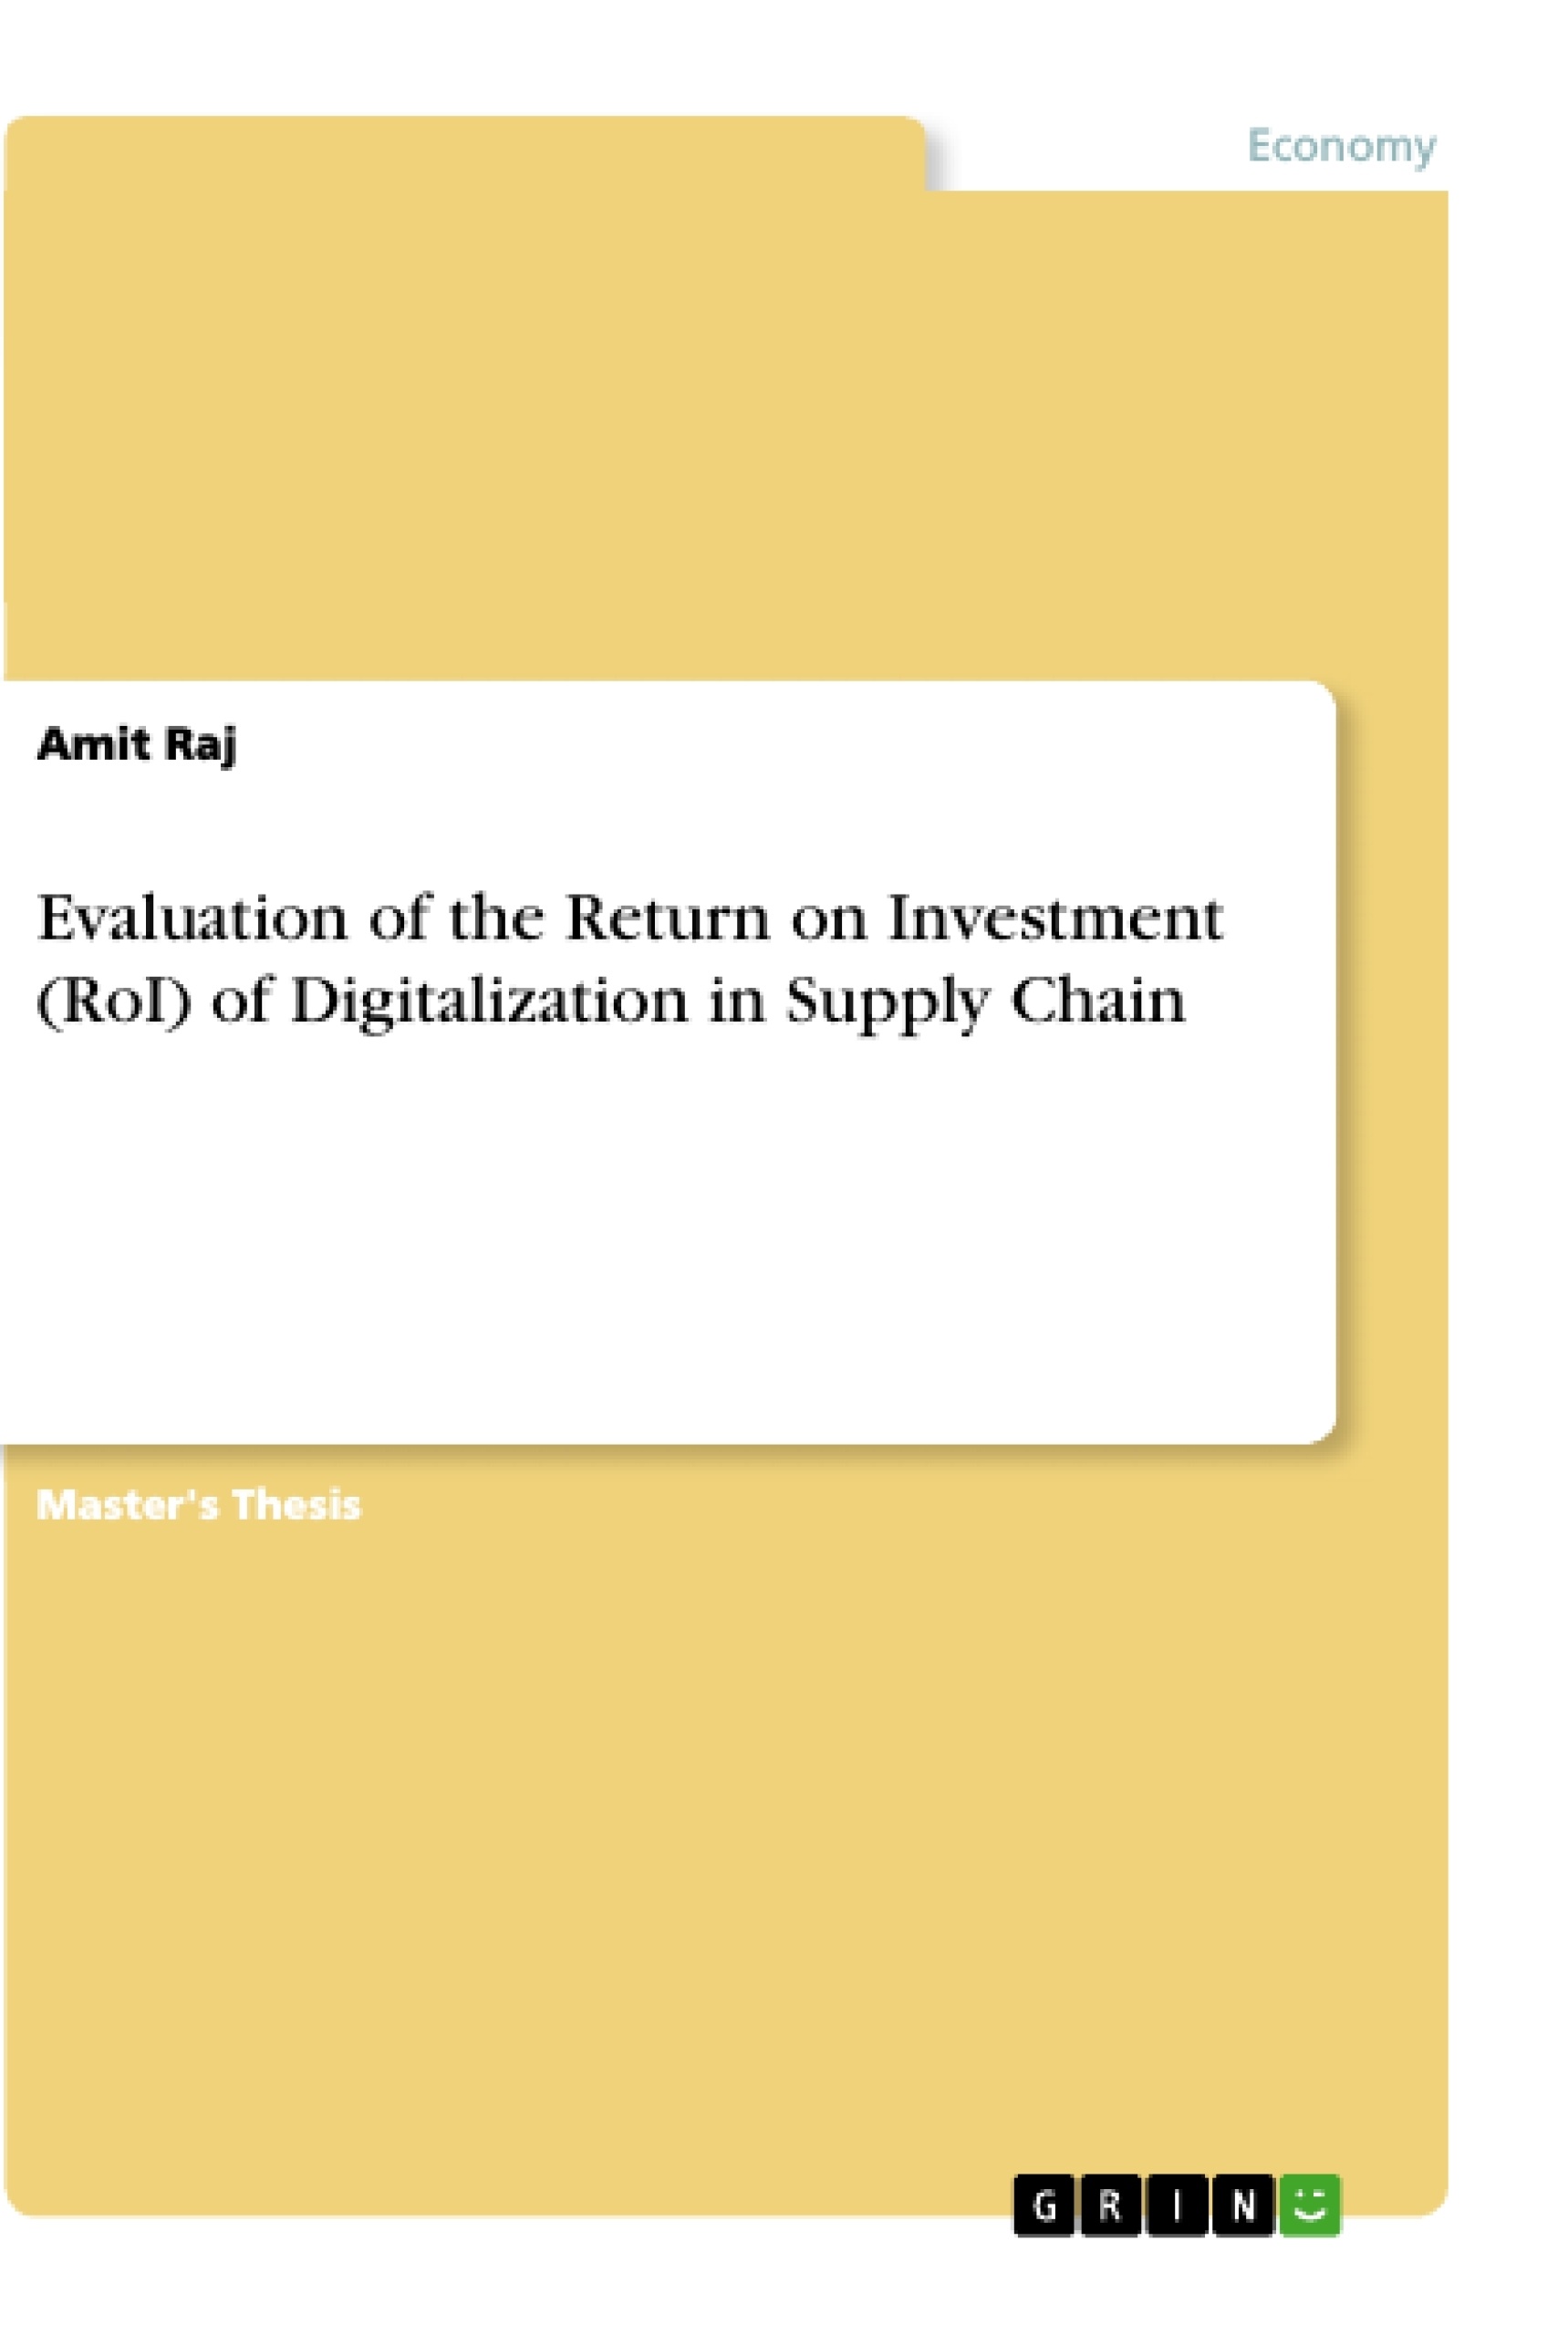 Title: Evaluation of the Return on Investment (RoI) of Digitalization in Supply Chain